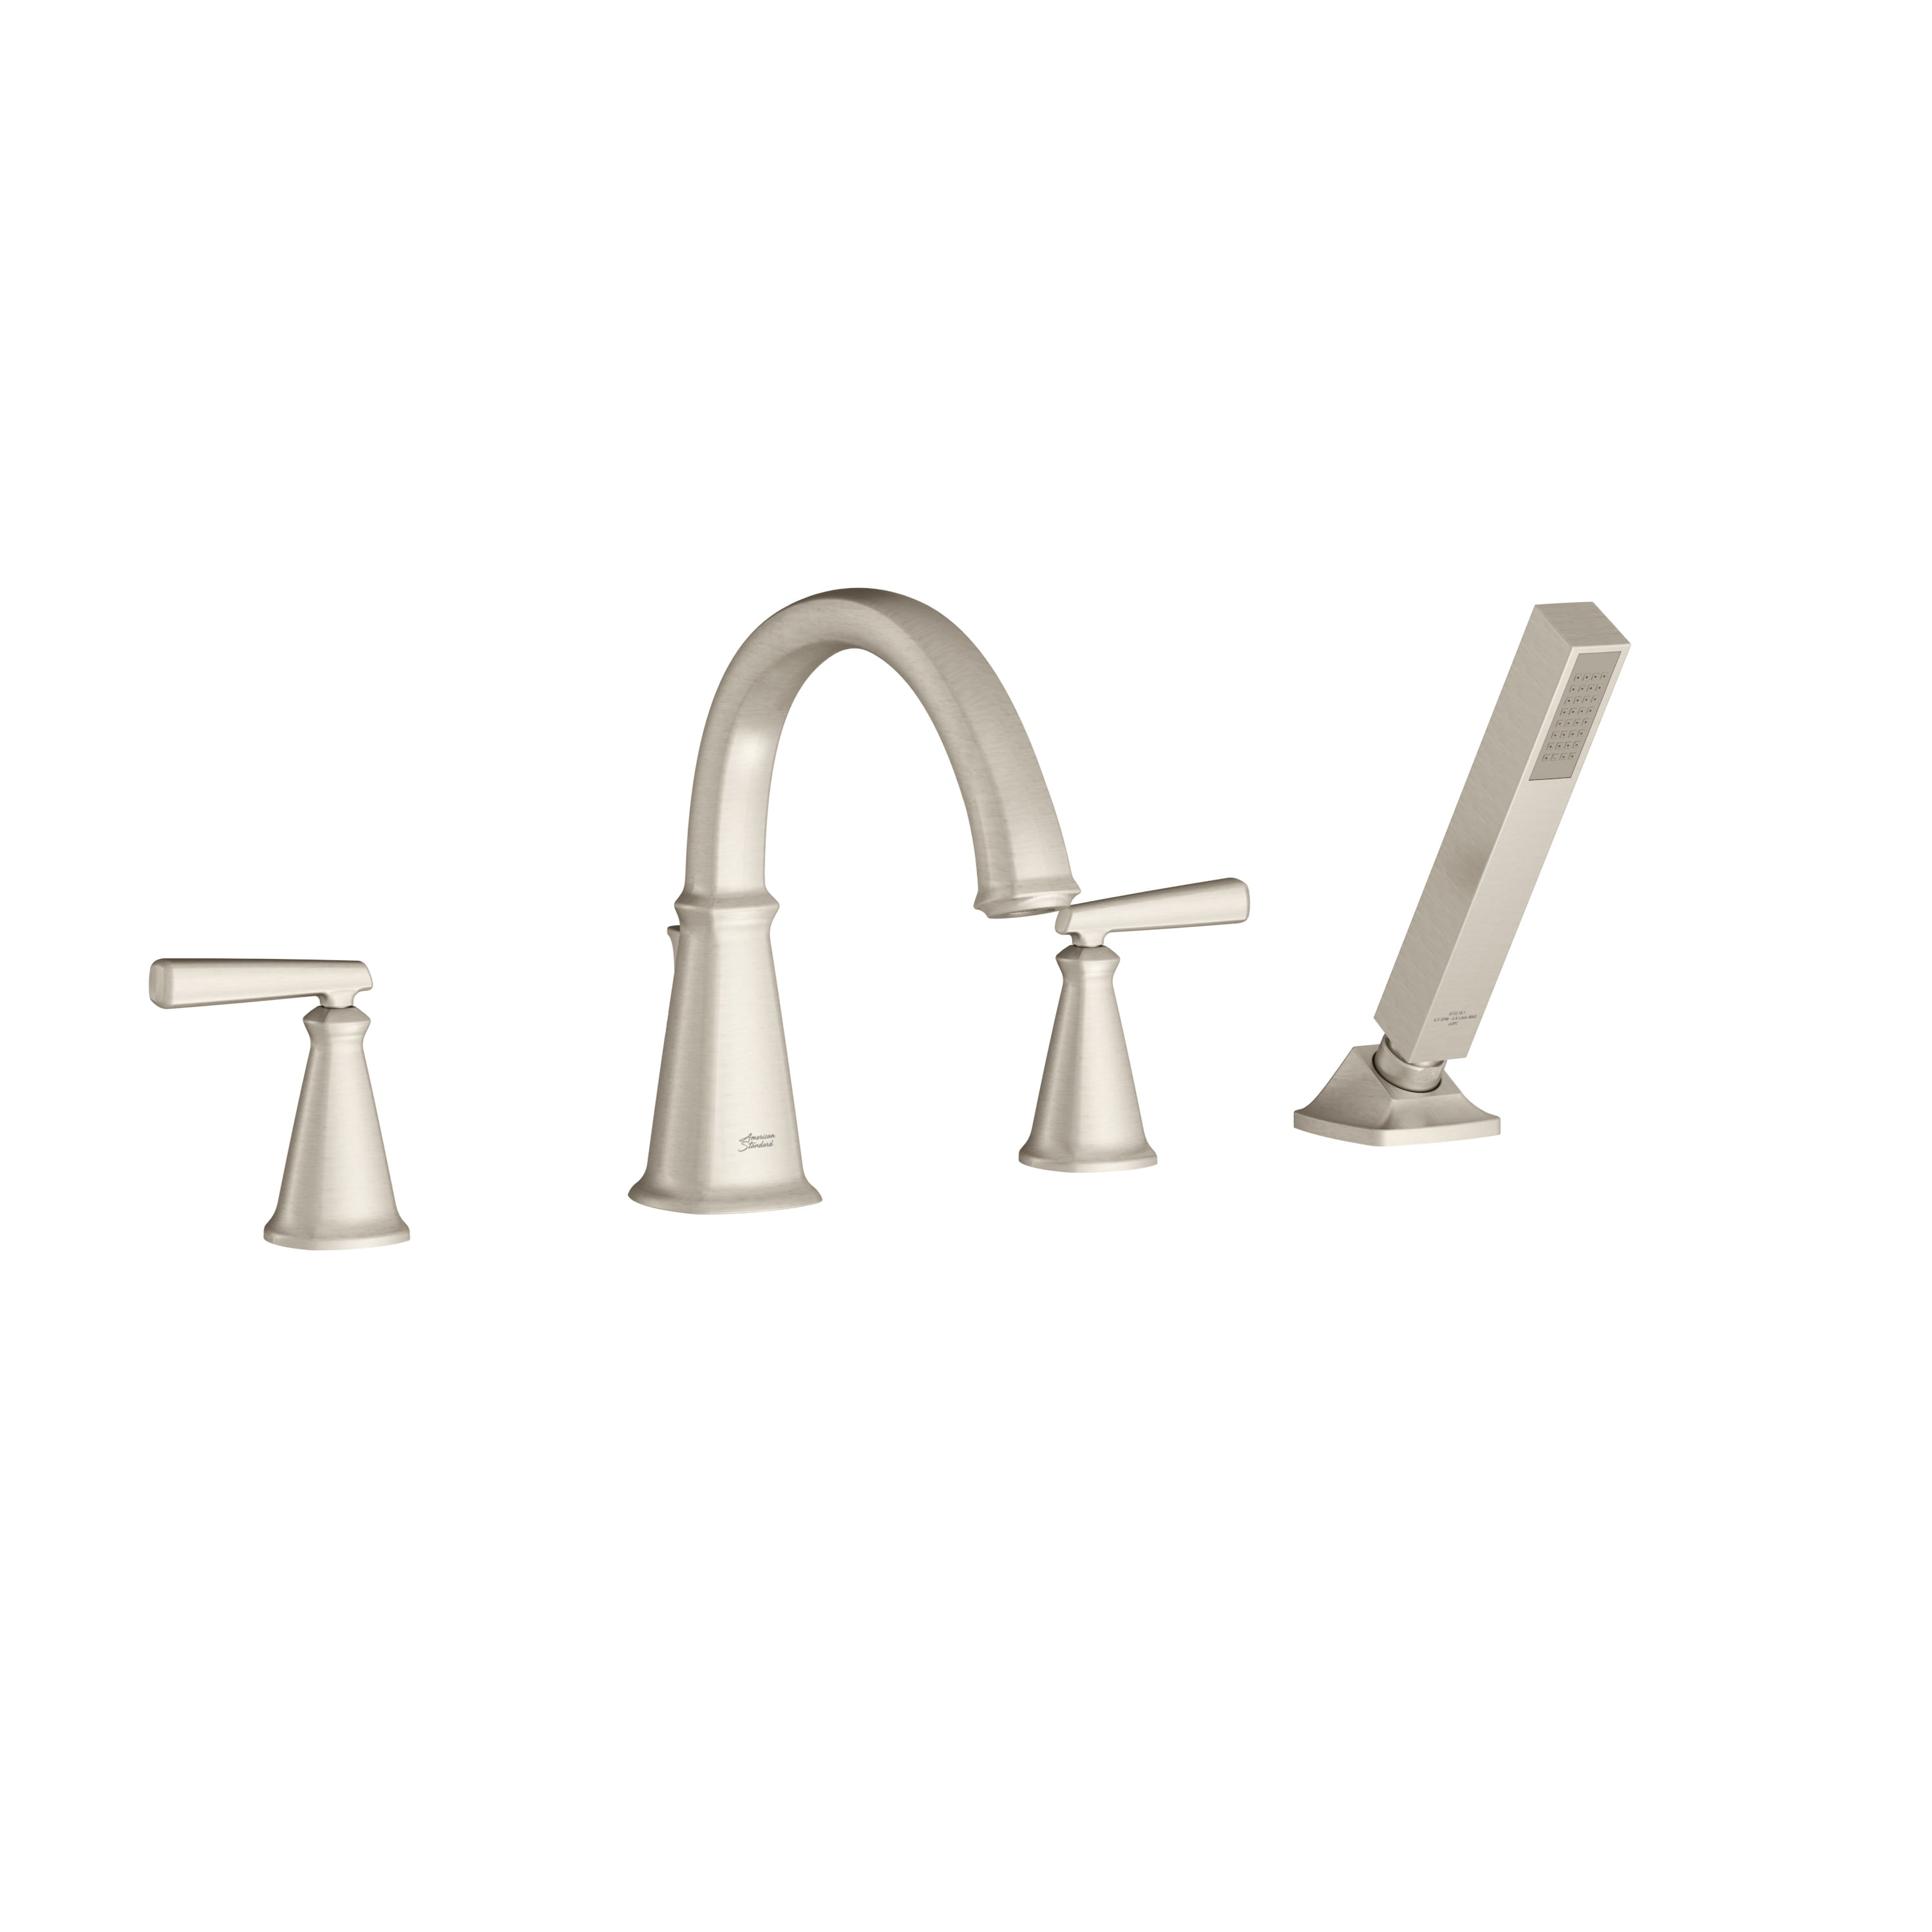 Edgemere Bathtub Faucet With Lever Handles and Personal Shower for Flash Rough In Valve   BRUSHED NICKEL